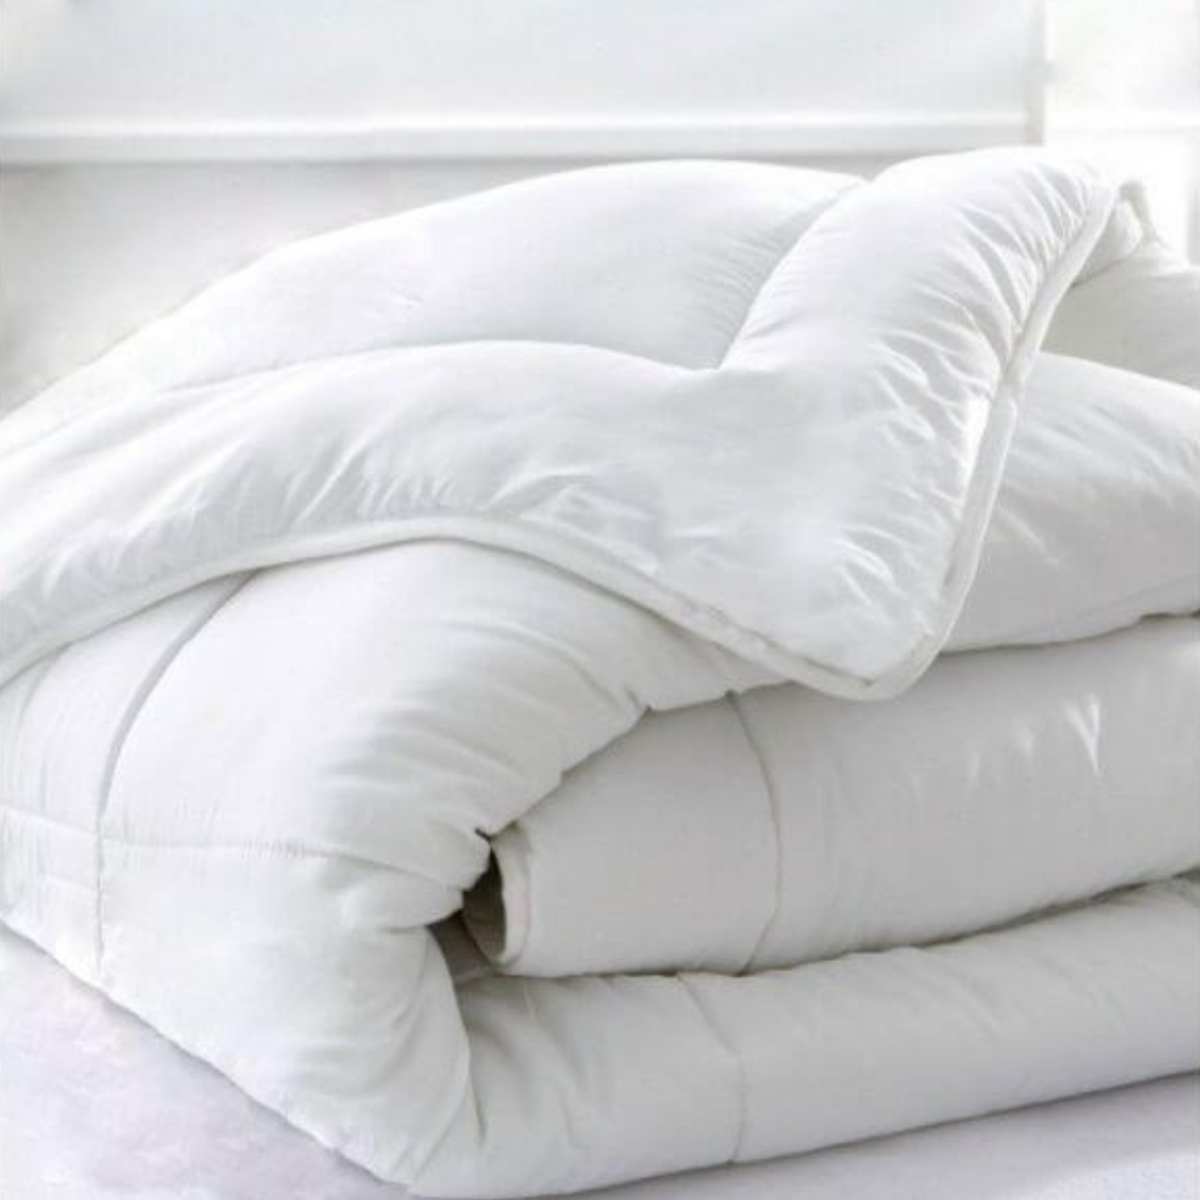 couette-hiver-coton-bio-260x240cm-400gm²-made-in-france